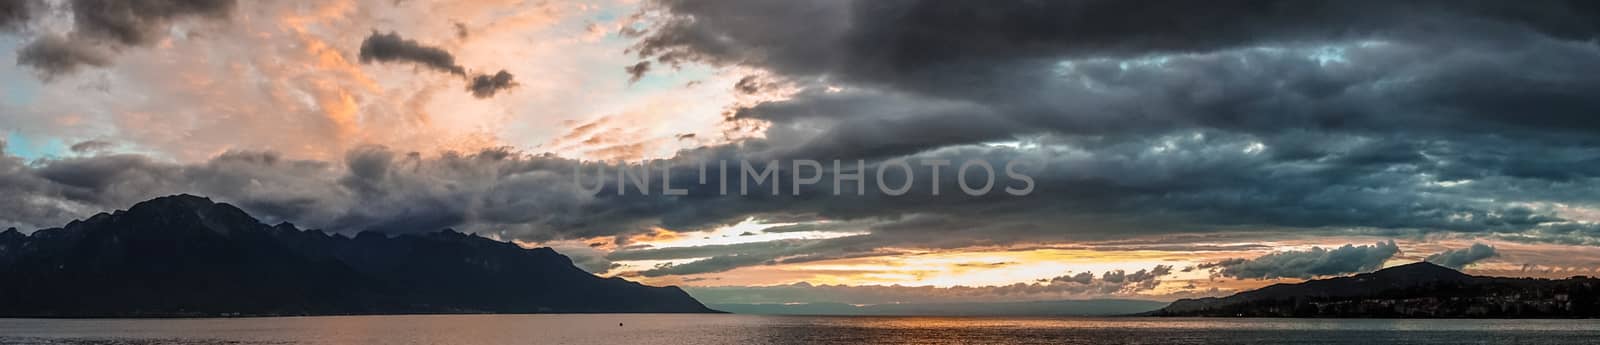 Sunset over Lake Geneva at Montreux by phil_bird